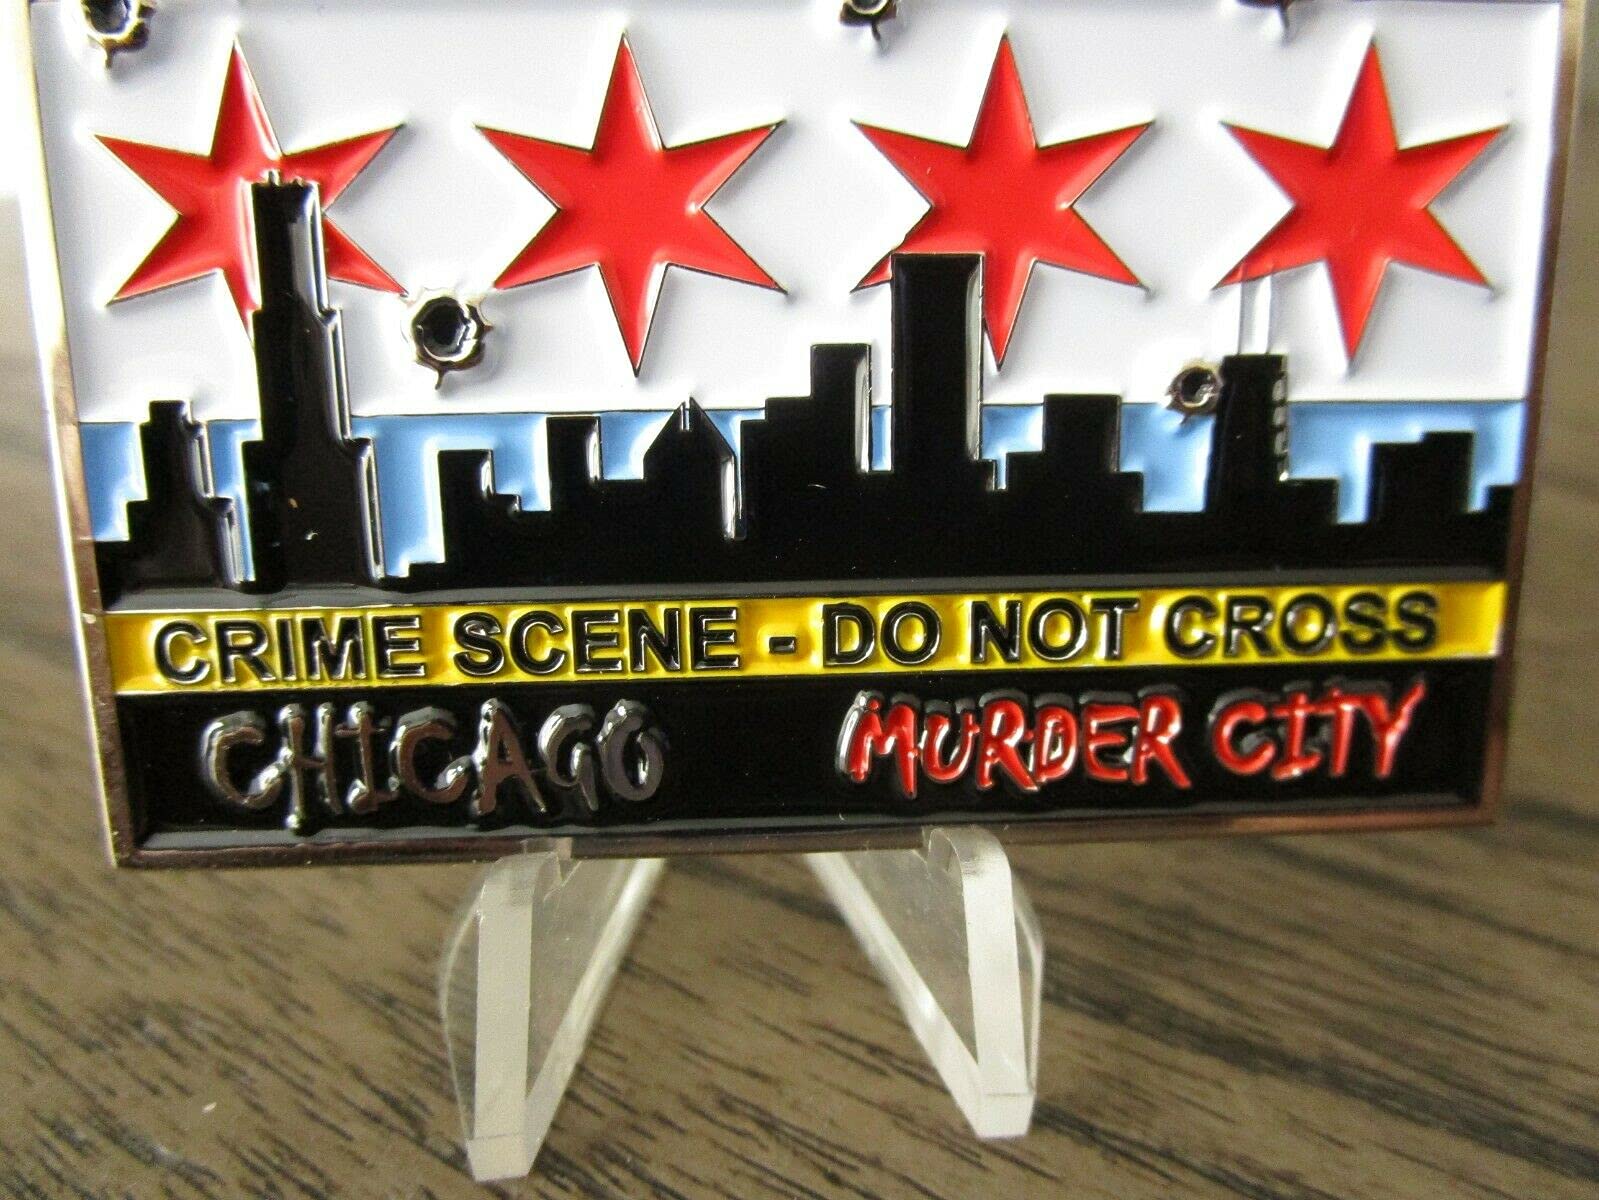 Chicago Police Department CPD Grim Reaper Help Wanted Murder City Challenge Coin